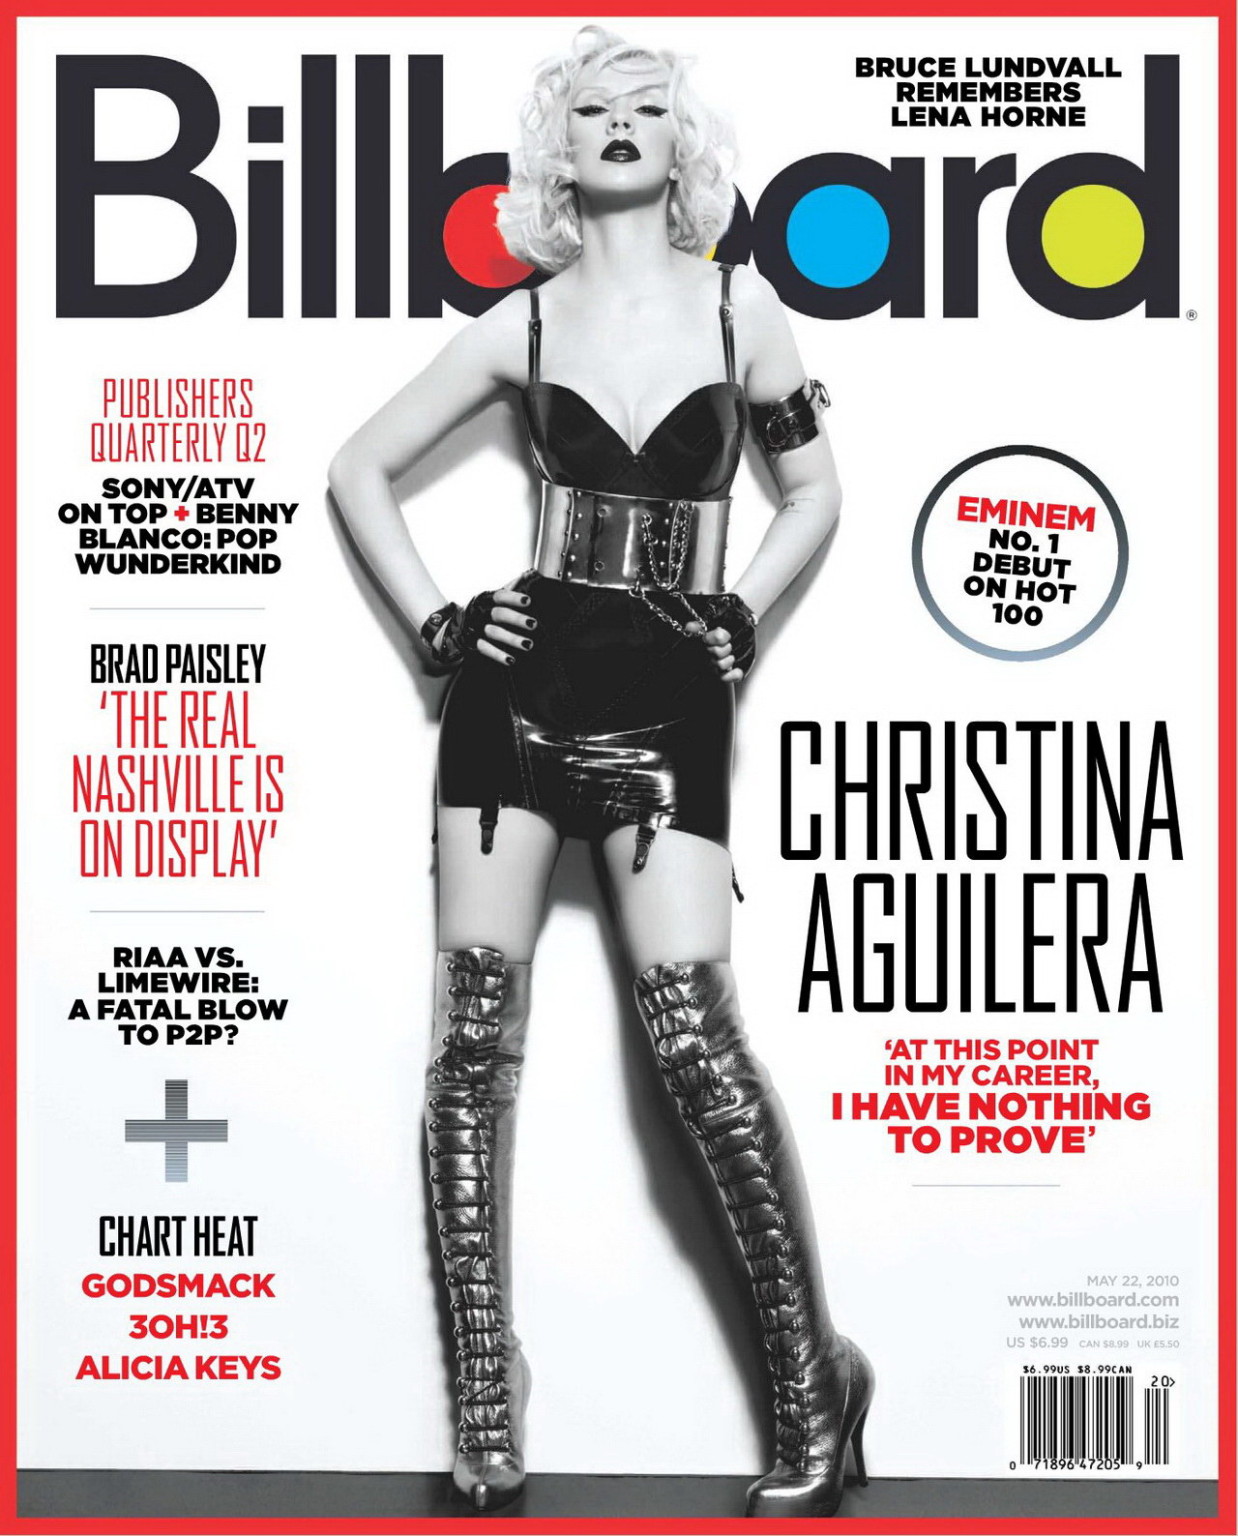 Christina Aguilera nude but covered  wearing fetish outfit for new promo photosh #75346109